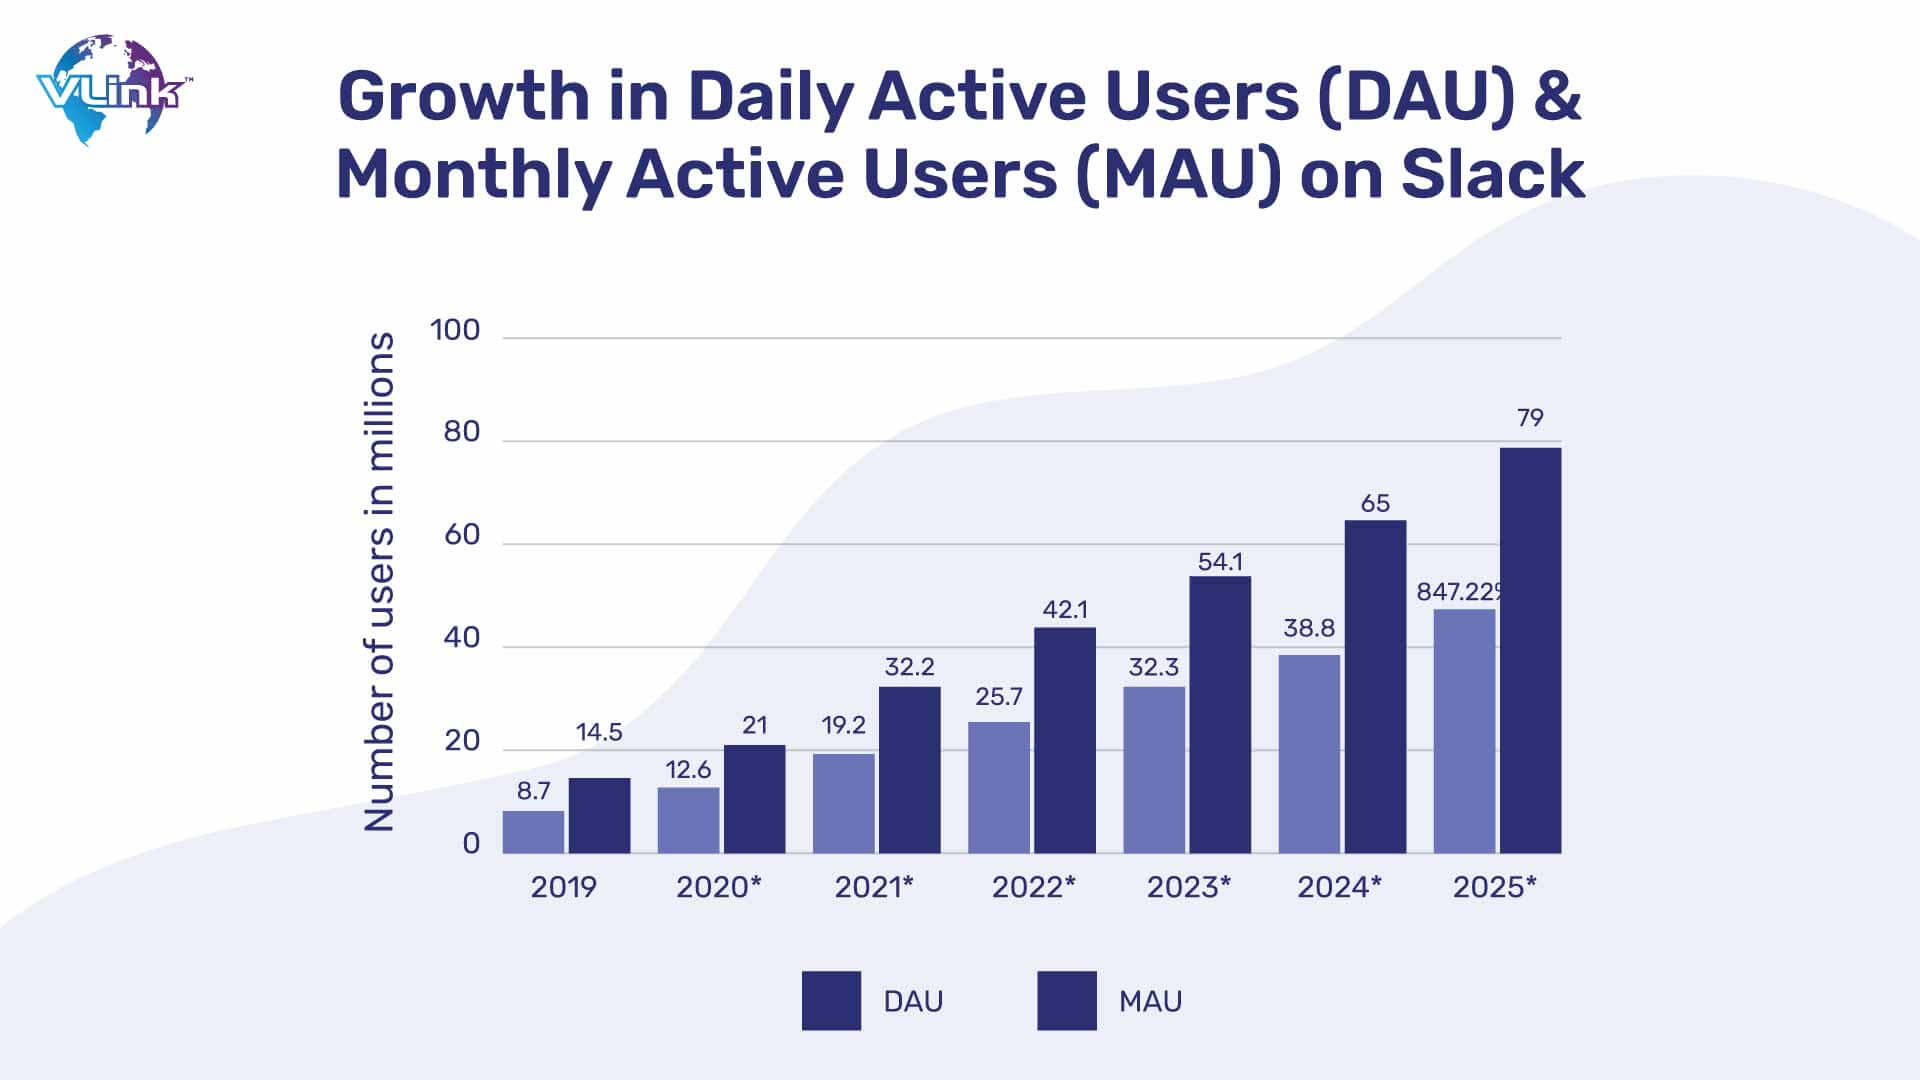 Growth in Daily Active Users (DAU) & Monthly Active Users (MAU) on Slack